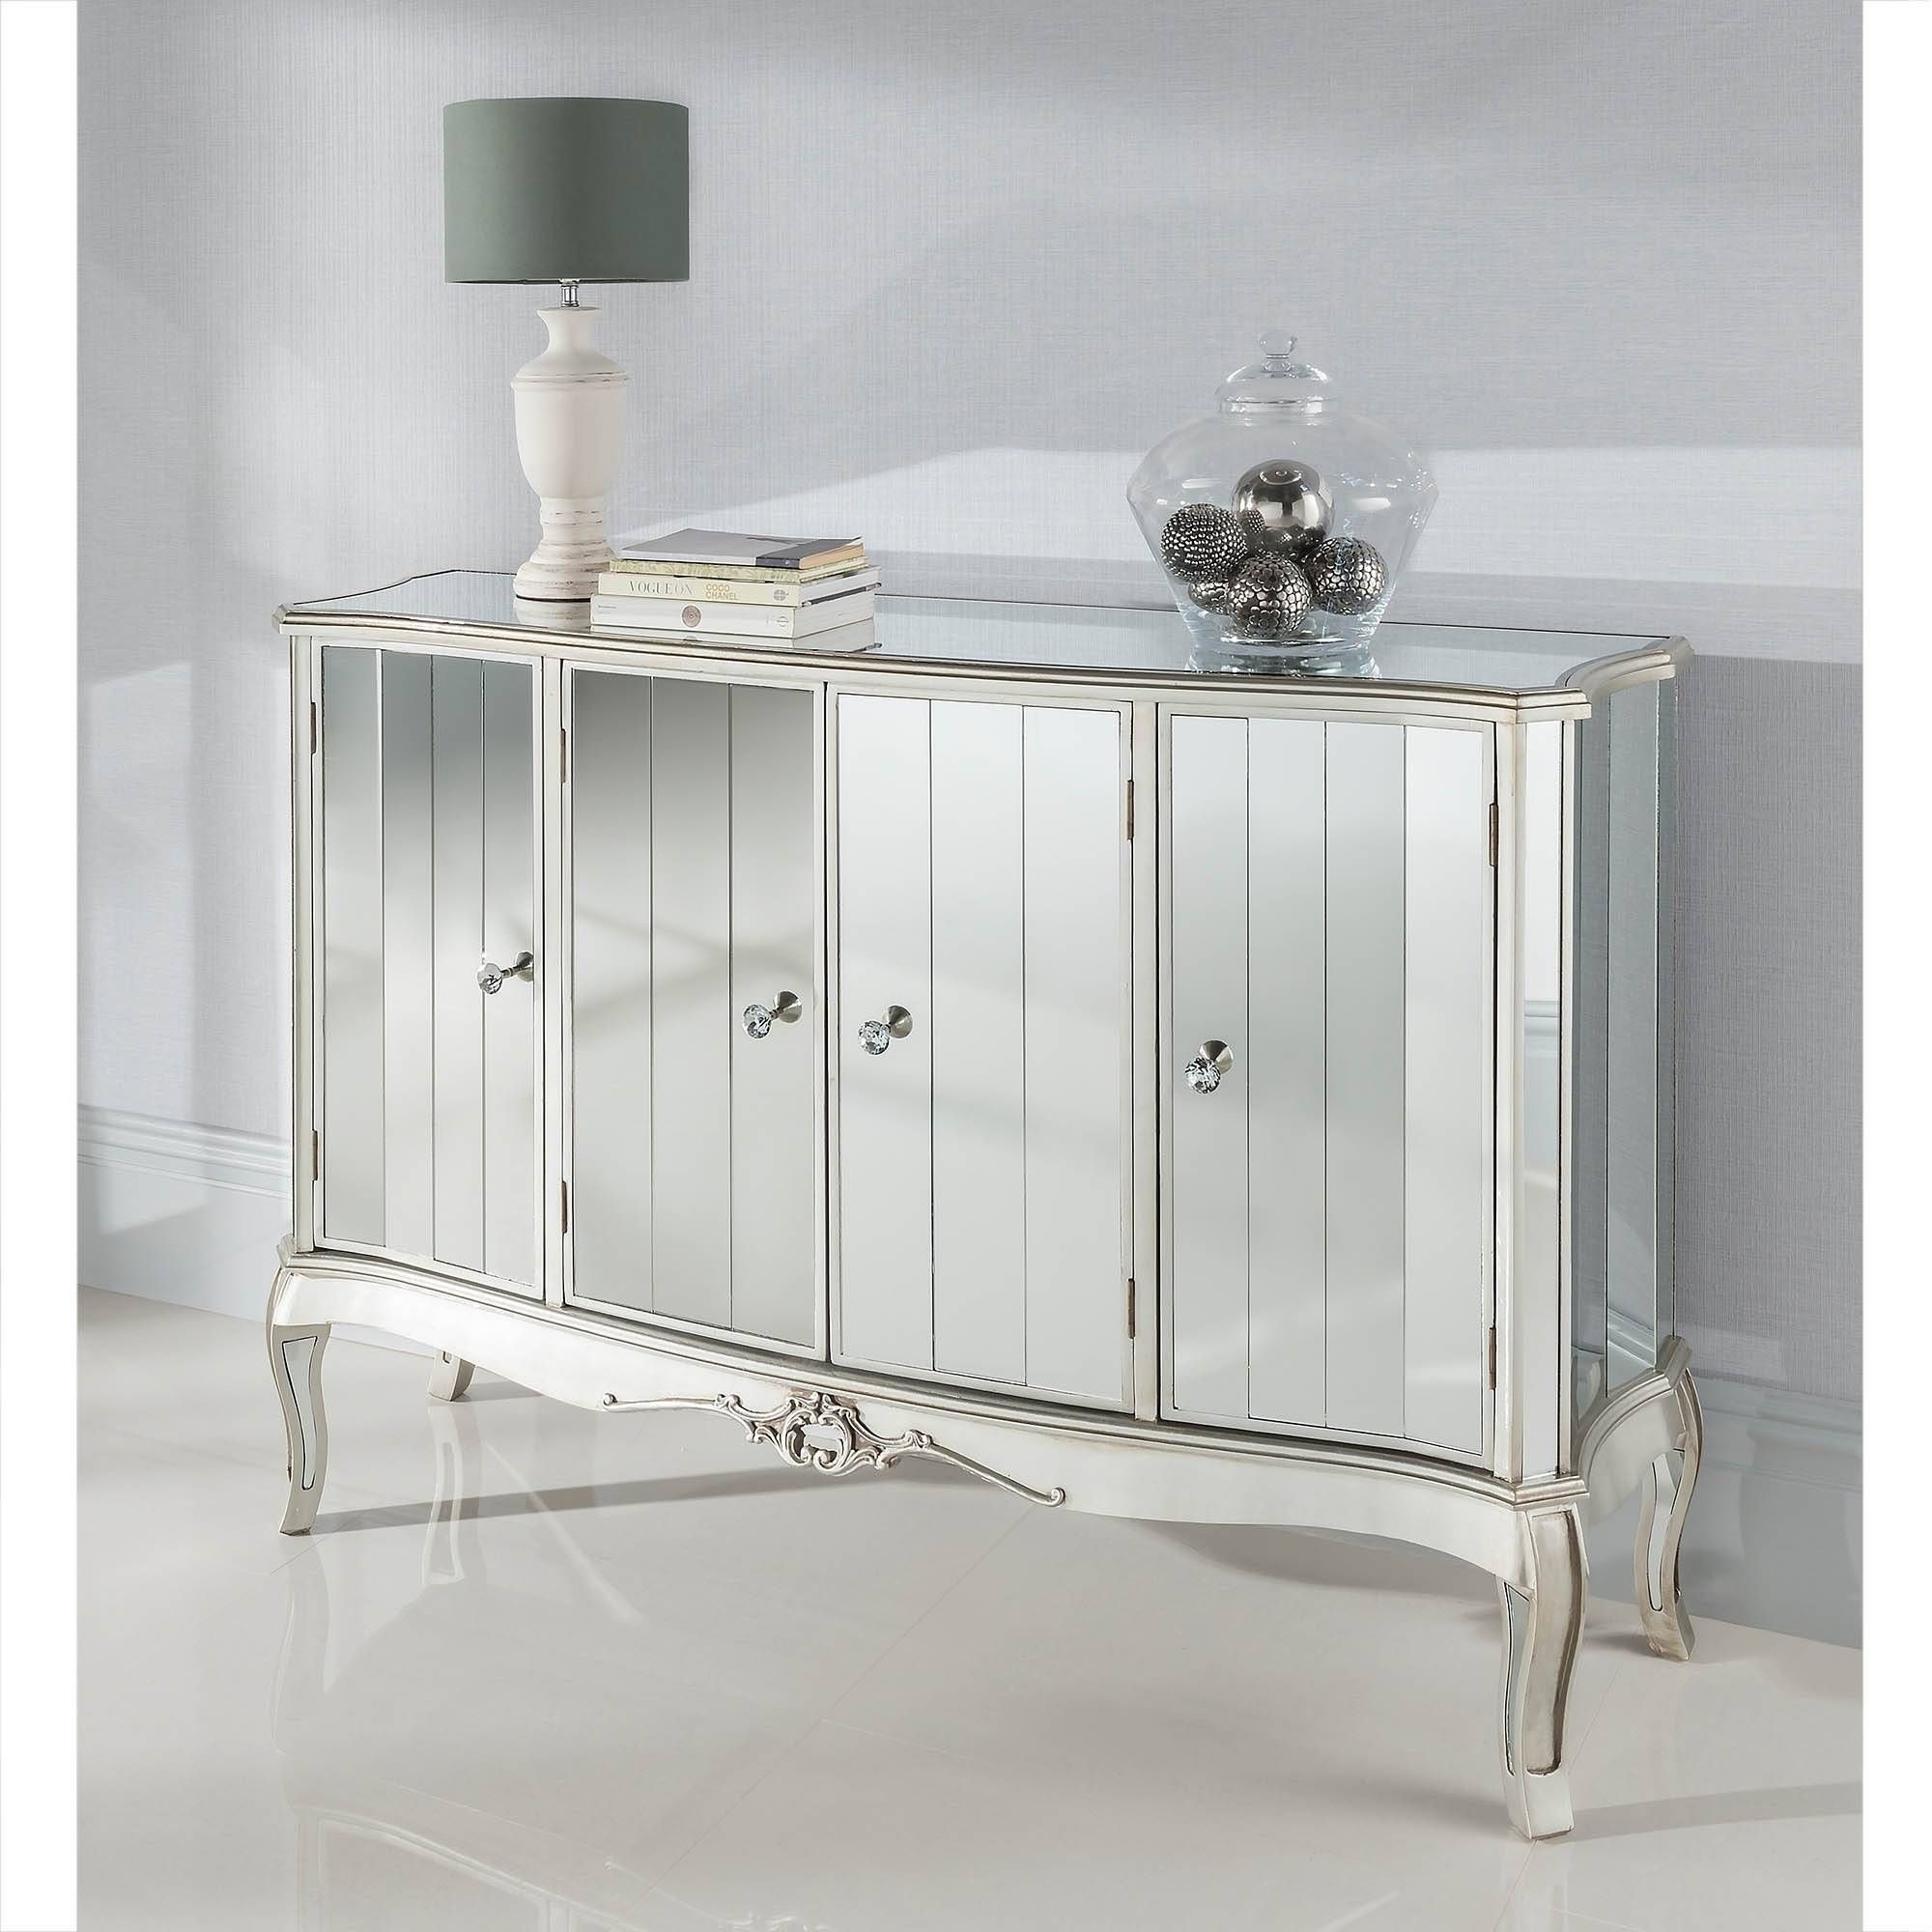 Argente Mirrored Four Door Sideboard | Mirrored Furniture Inside Mirrored Sideboard (View 8 of 20)